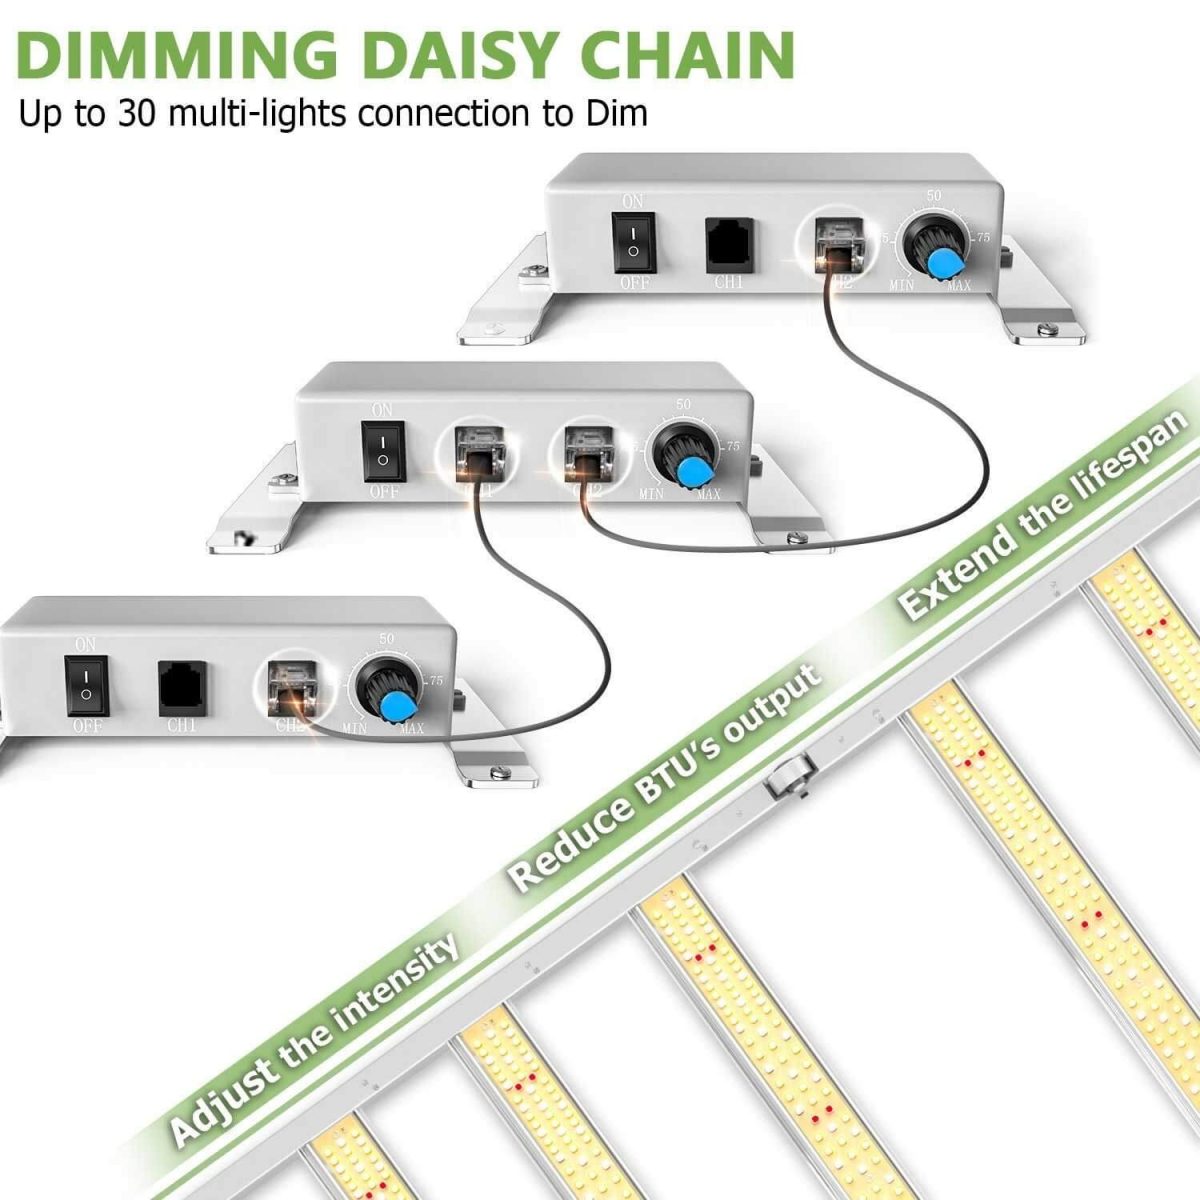 FC3000 LED grow lights support dimming daisy chain function to adjust light intensity of up to 30 LEDs with one dimmer.